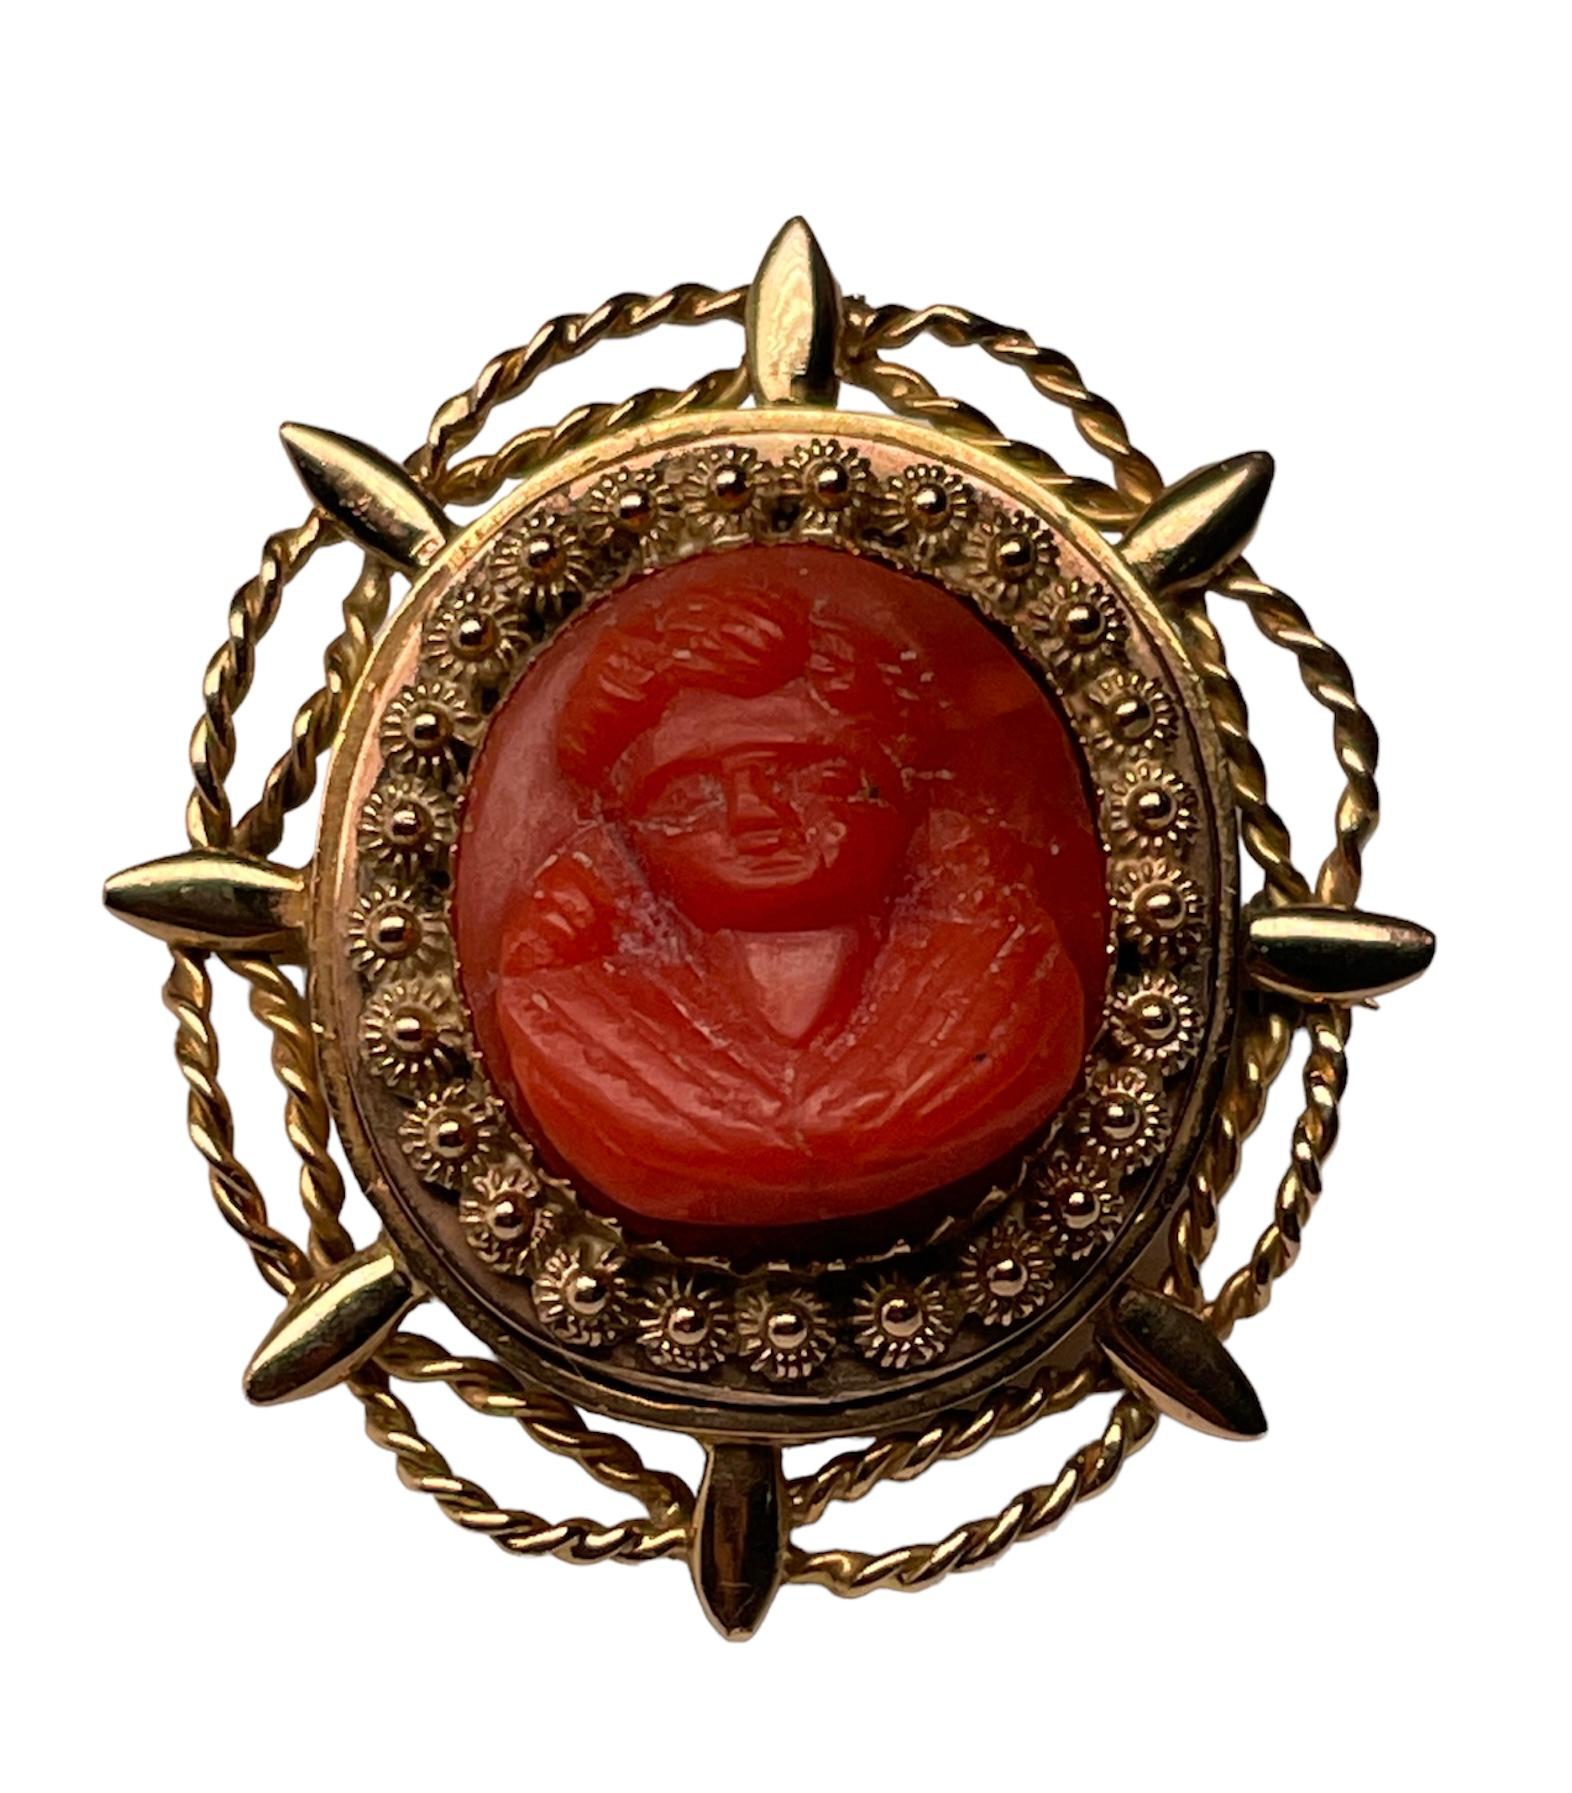 This is an 18k Yellow gold Mediterranean coral cameo brooch/pendant. The high relief hand carved round coral cameo depicts the portrait of a young girl. It is mounted in a gold round frame that is decorated with floral cannetilles. A steering wheel